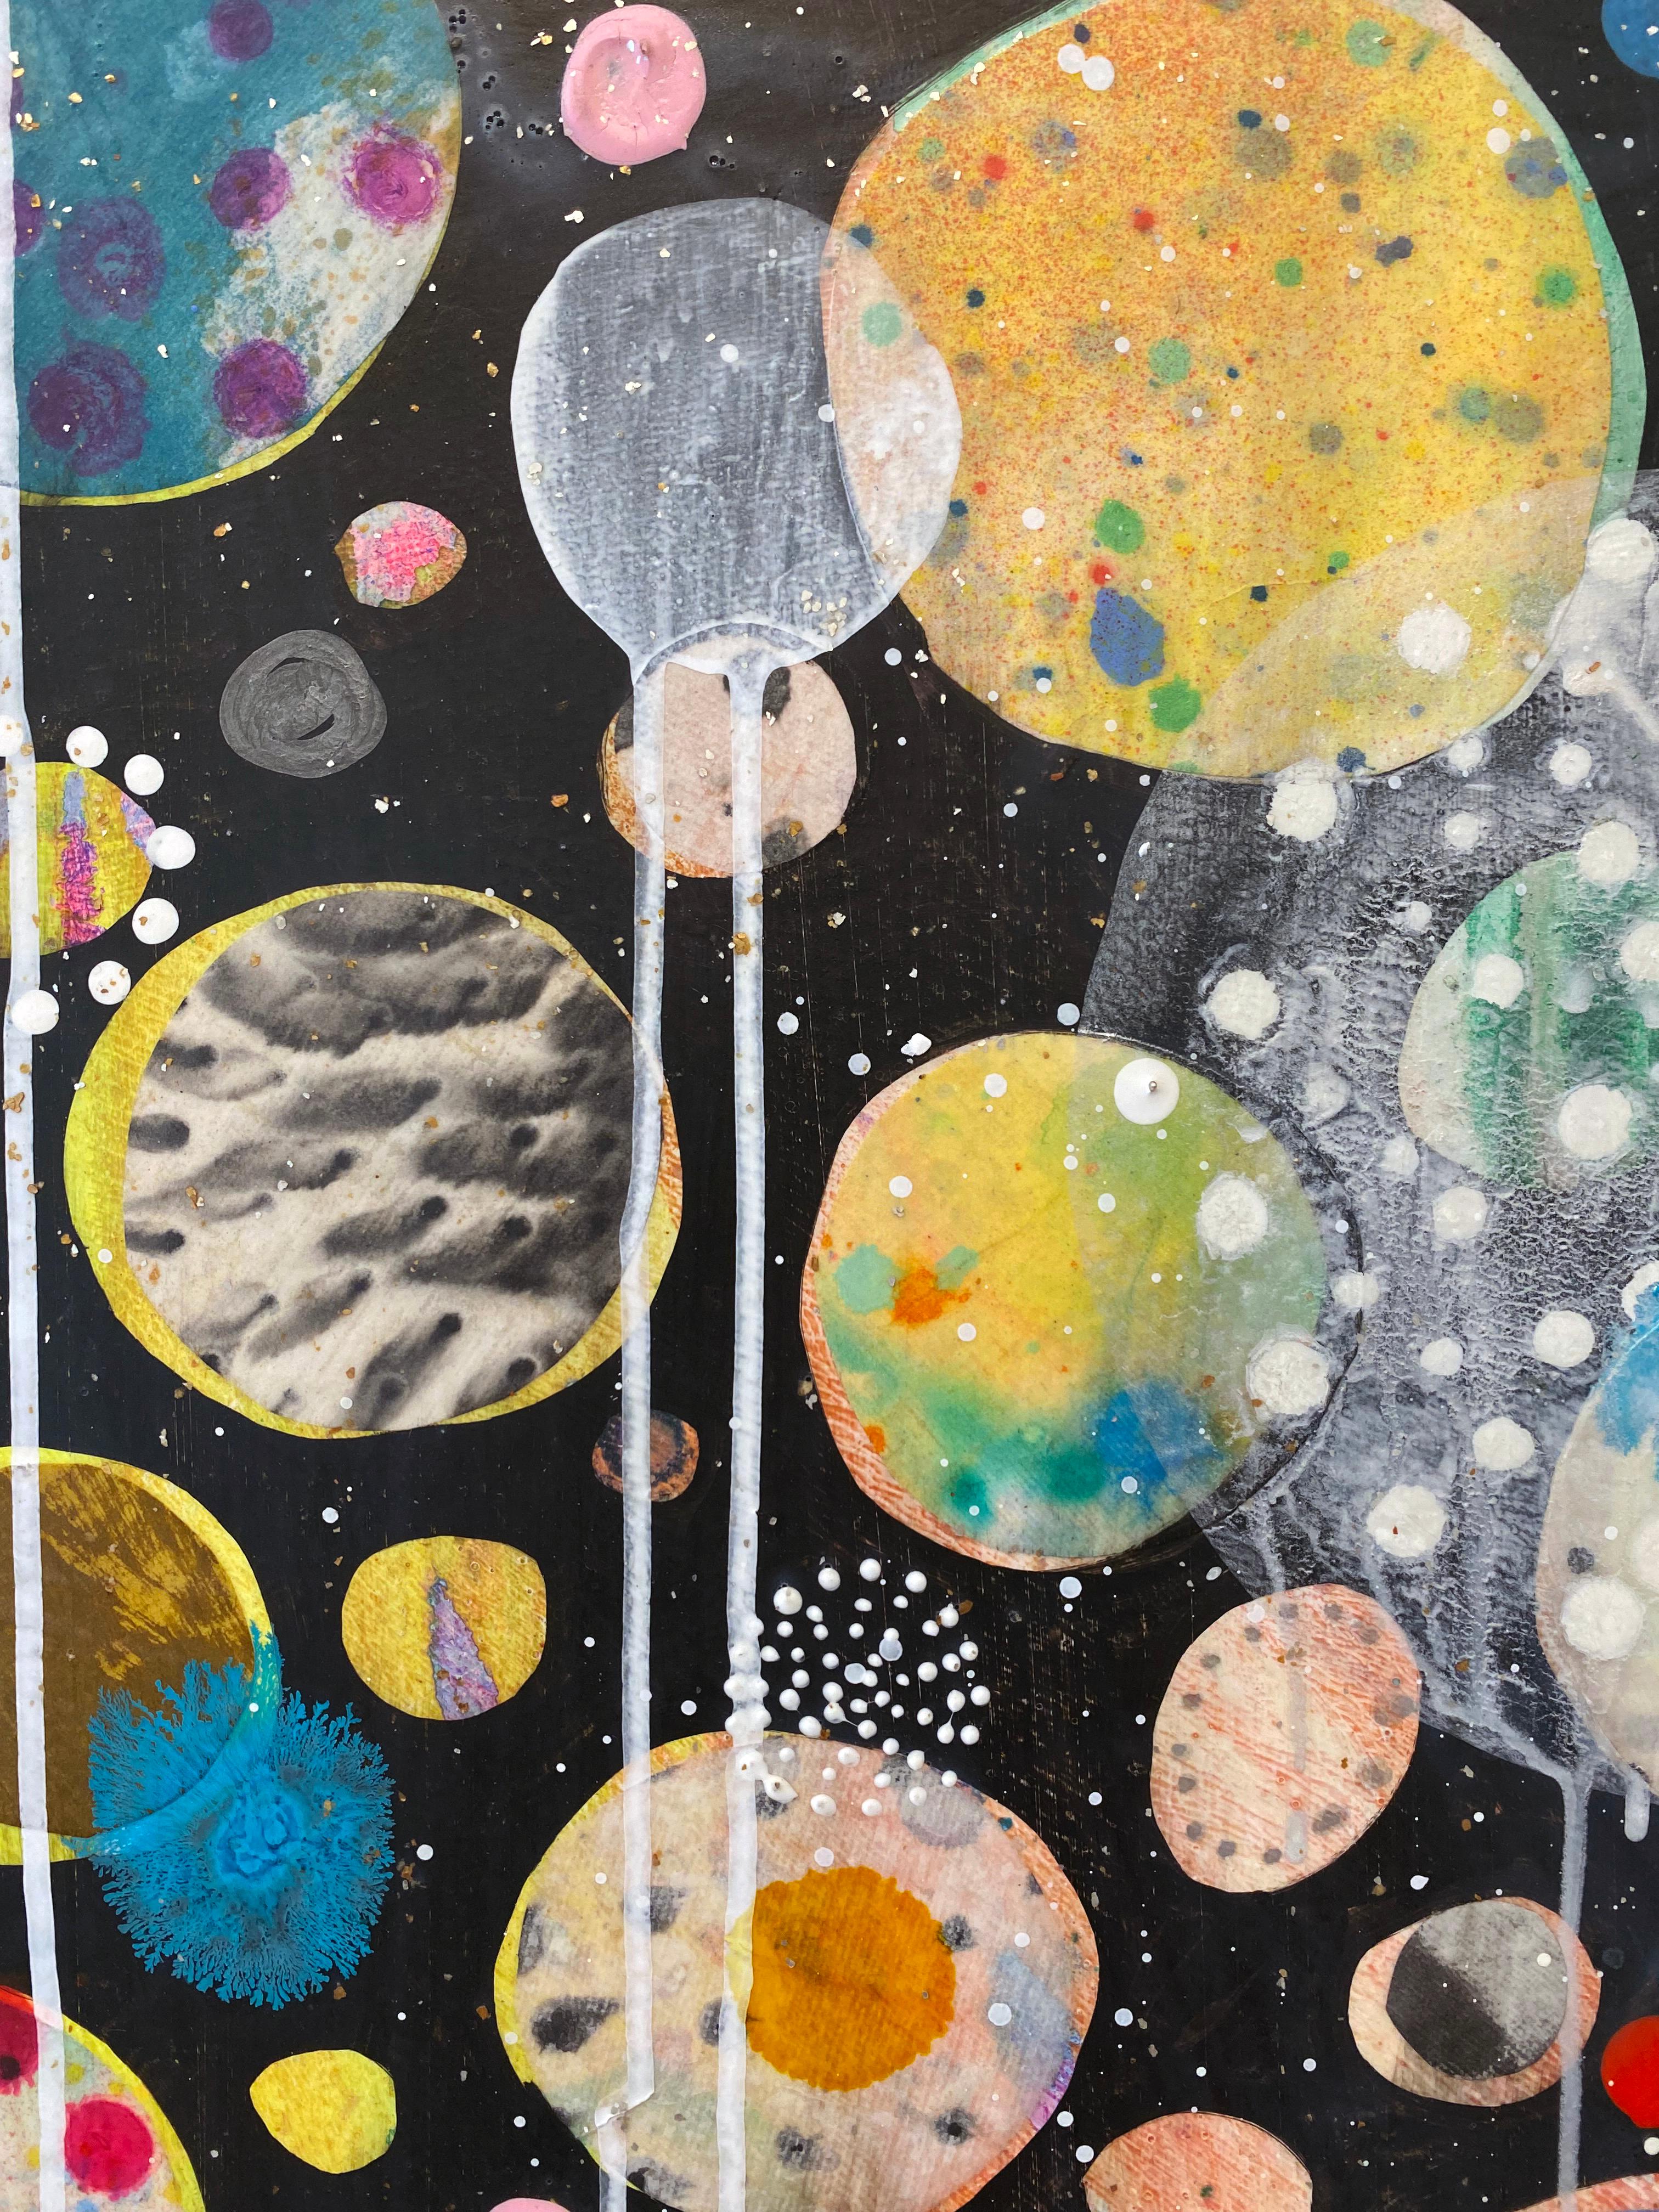 Abstract, Colorful Mixed Media Painting by Liz Tran 'Perseid II' For Sale 5